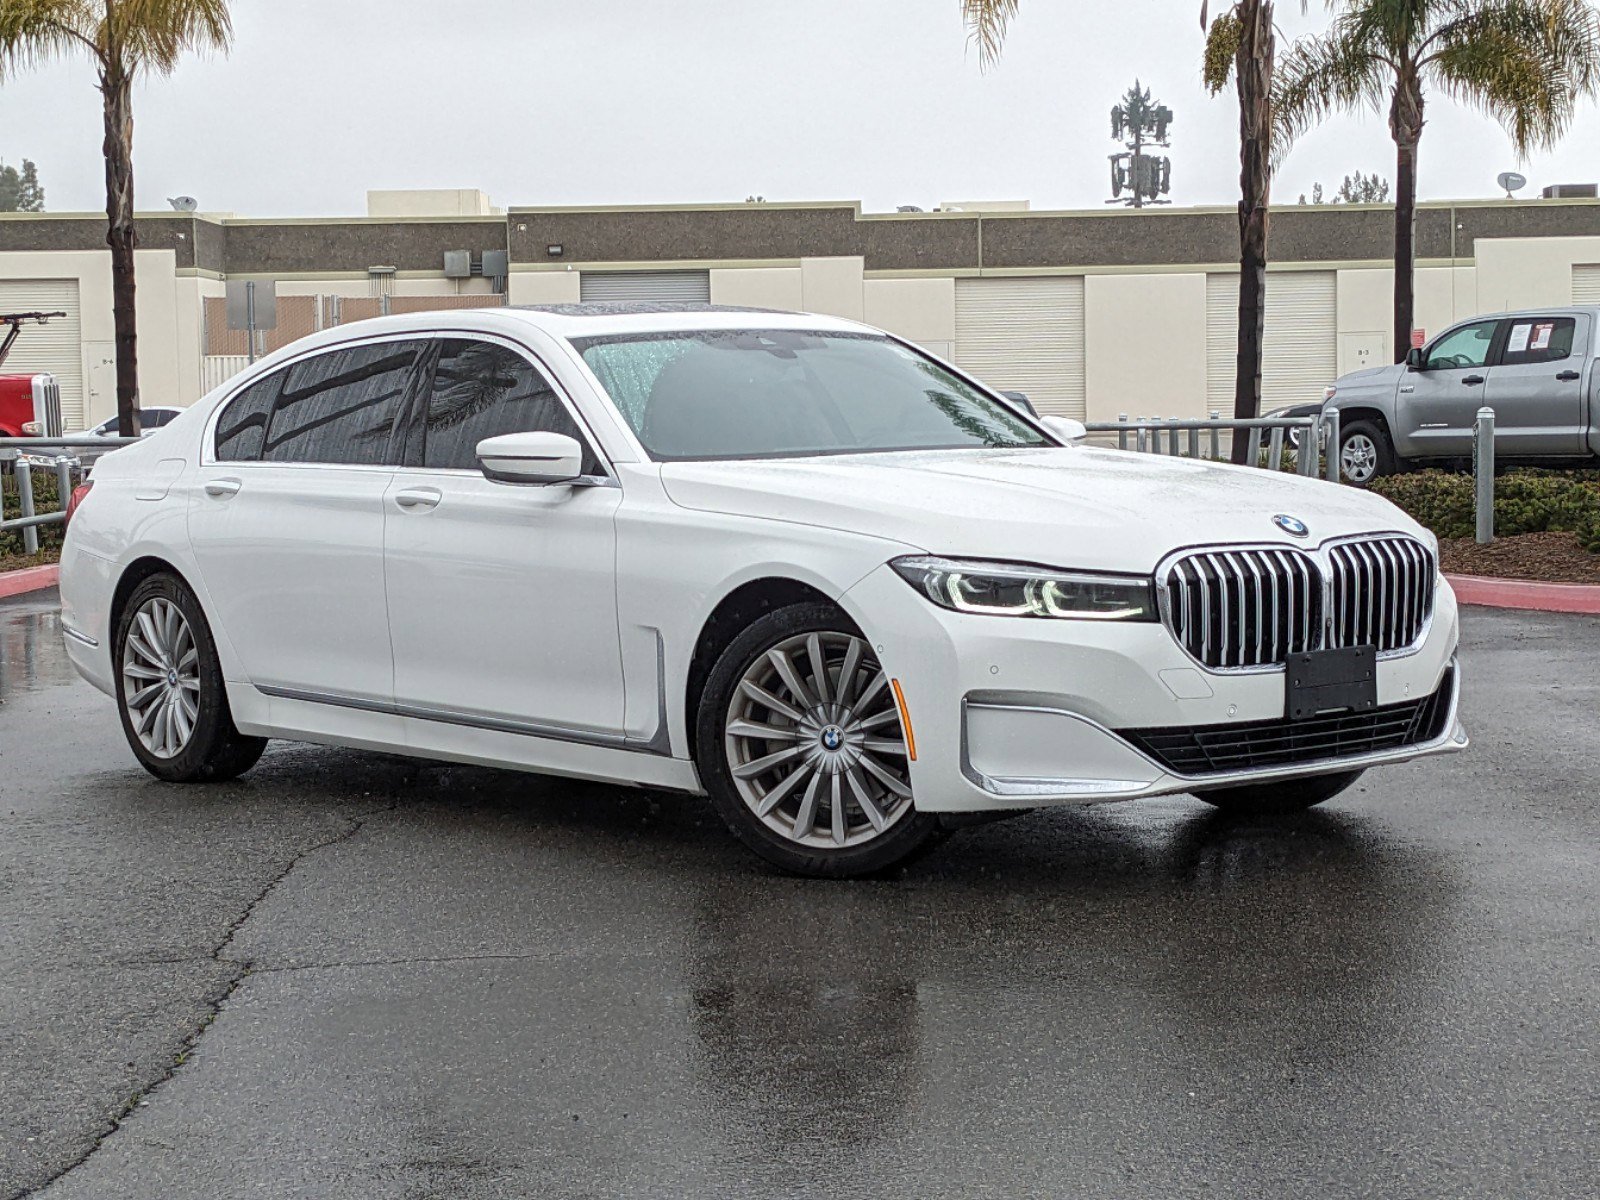 Pre-Owned 2020 BMW 7 Series 740i Sedan in Cary #P8272 | Hendrick Chevrolet  Cary